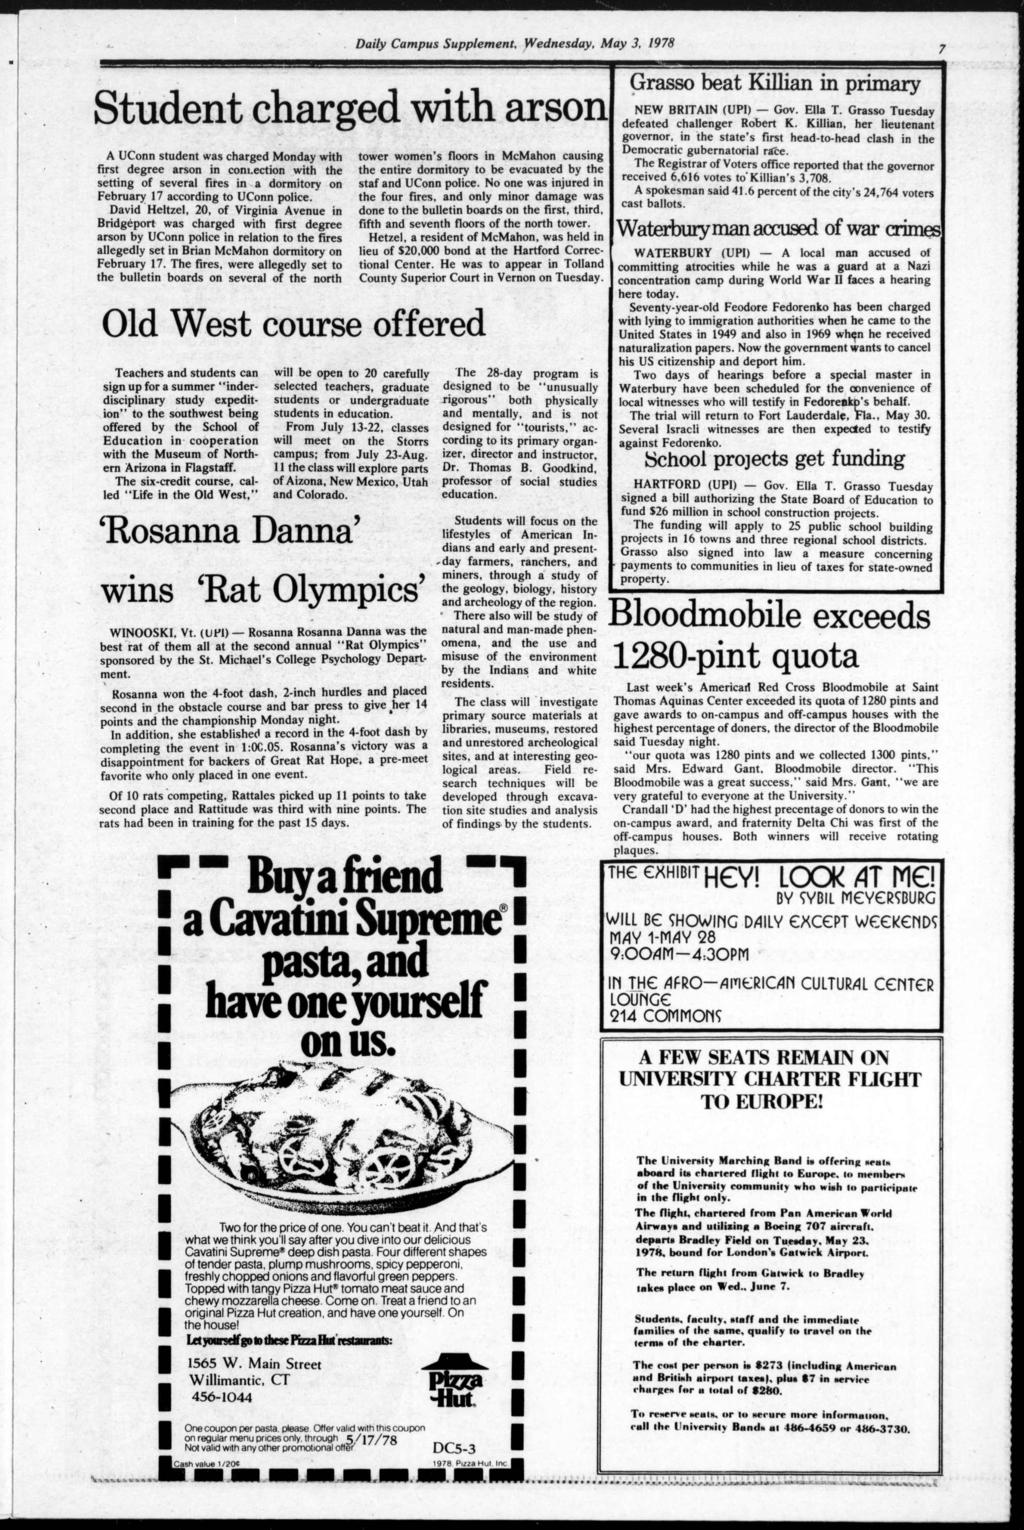 Daly Campus Supplement, Wednesday, May 3, 1978 Student charged wth arson A UConn student was charged Monday wth frst degree arson n connecton wth the settng of several fres n a dormtory on February